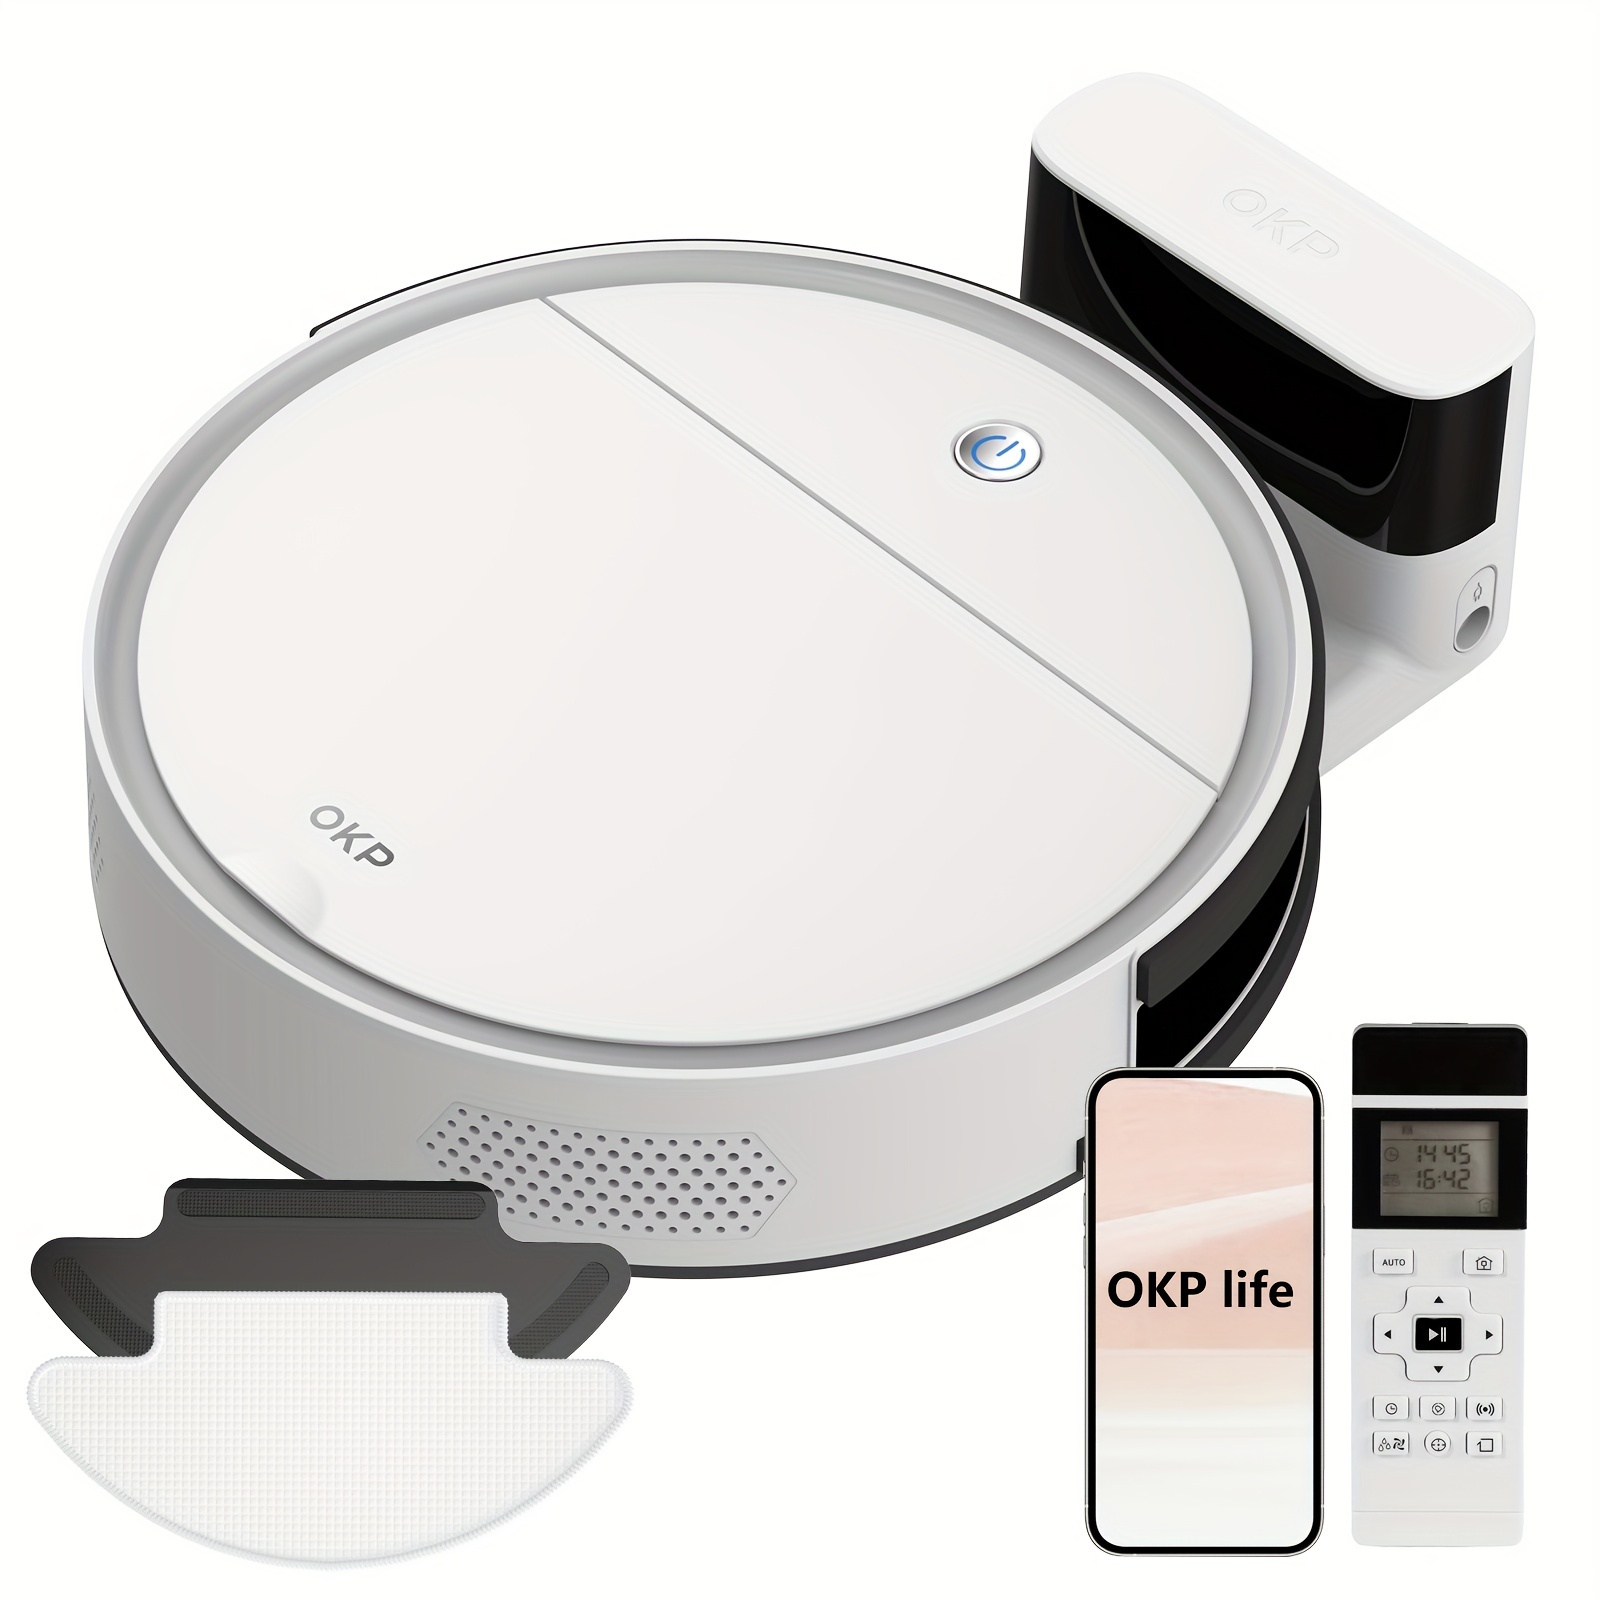 

Okp 2 In 1 Robot Vacuum And Mop, Wifi/app/alexa, Robot Vacuum Cleaner With Schedule, Efficient Filtration System, Self-charging, Slim Design, Perfect For Hard Floors, Pet Hair, Carpets, K5